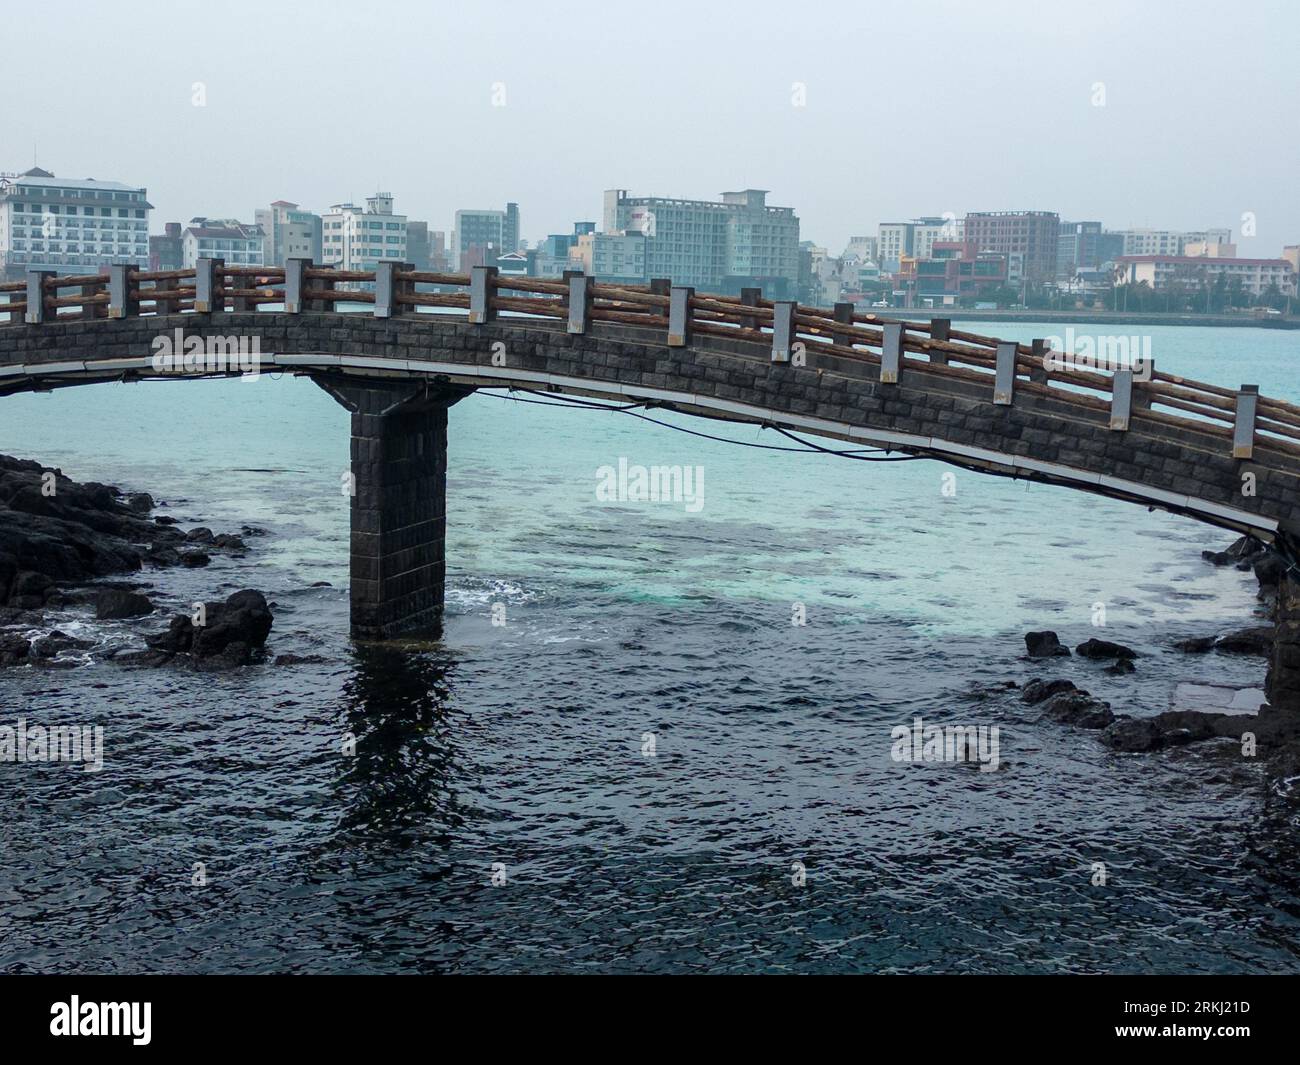 A scenic view of a bridge spanning a body of water near a city skyline: Jeju, South Korea Stock Photo